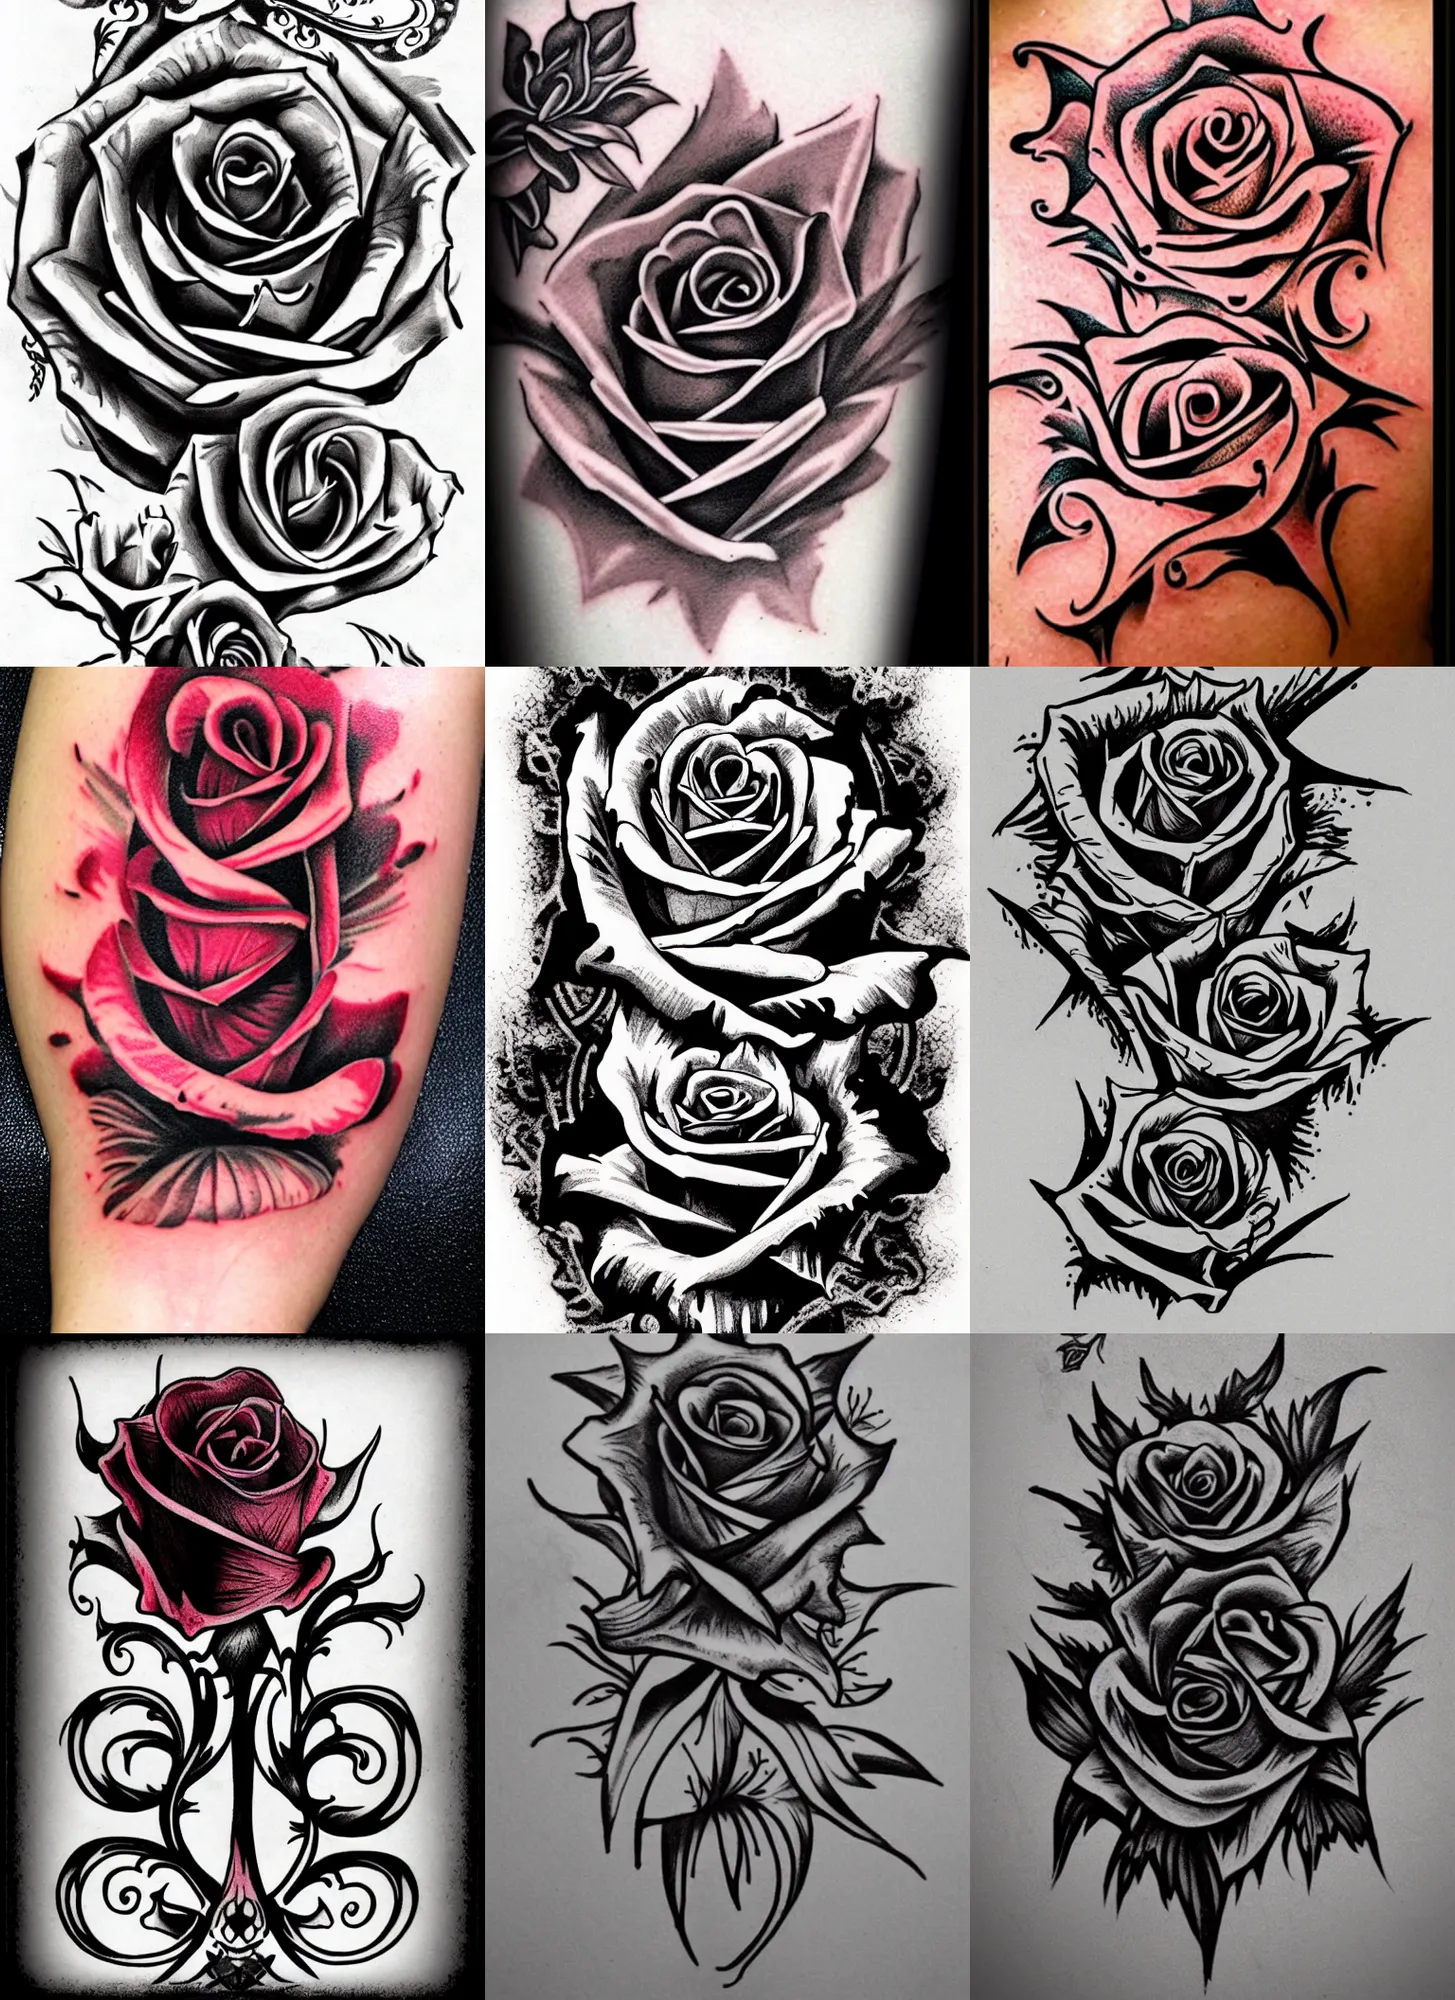 Sidebar Graphics & Pngs - Rose Tattoo Stencil For Men Transparent PNG -  500x551 - Free Download on NicePNG